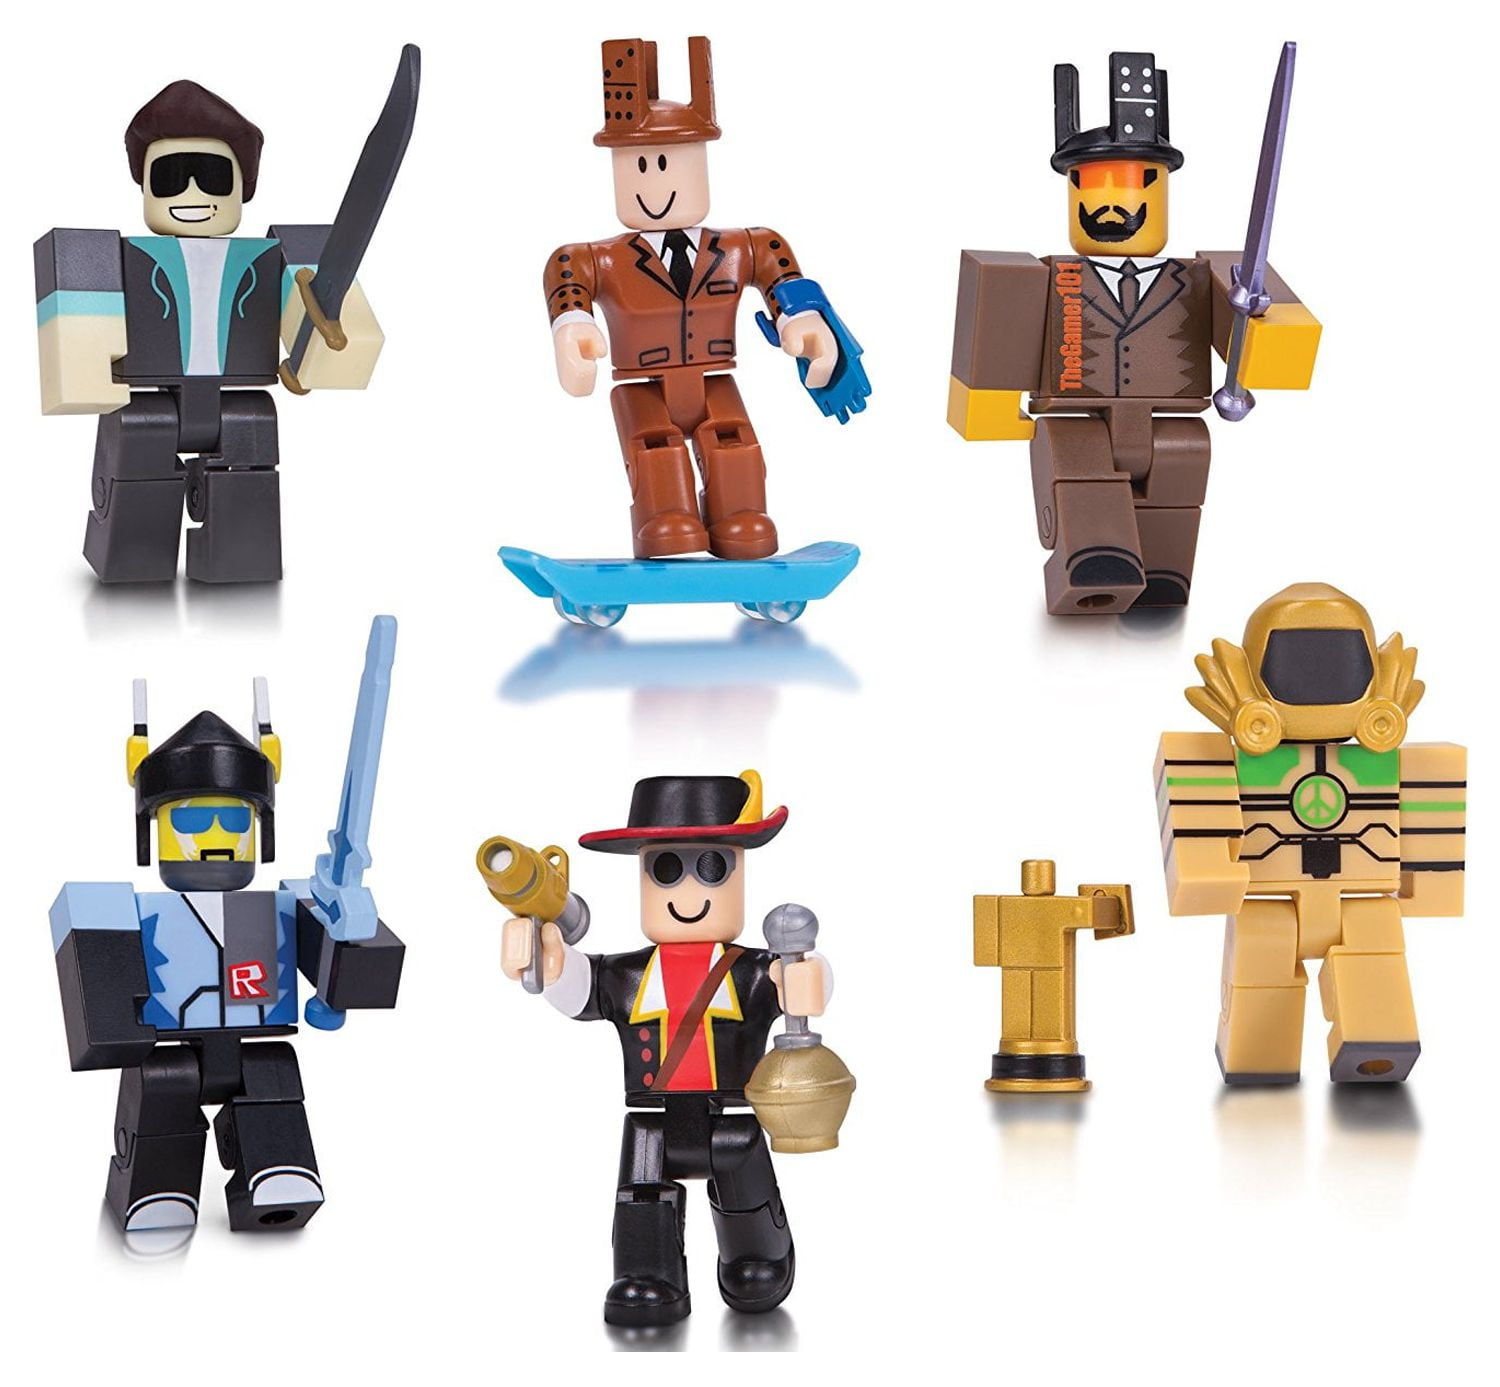 Roblox Action Collection - Legends of Roblox 15th Anniversary Gold Six  Figure Pack, 6 years and up [Includes Exclusive Virtual Item]